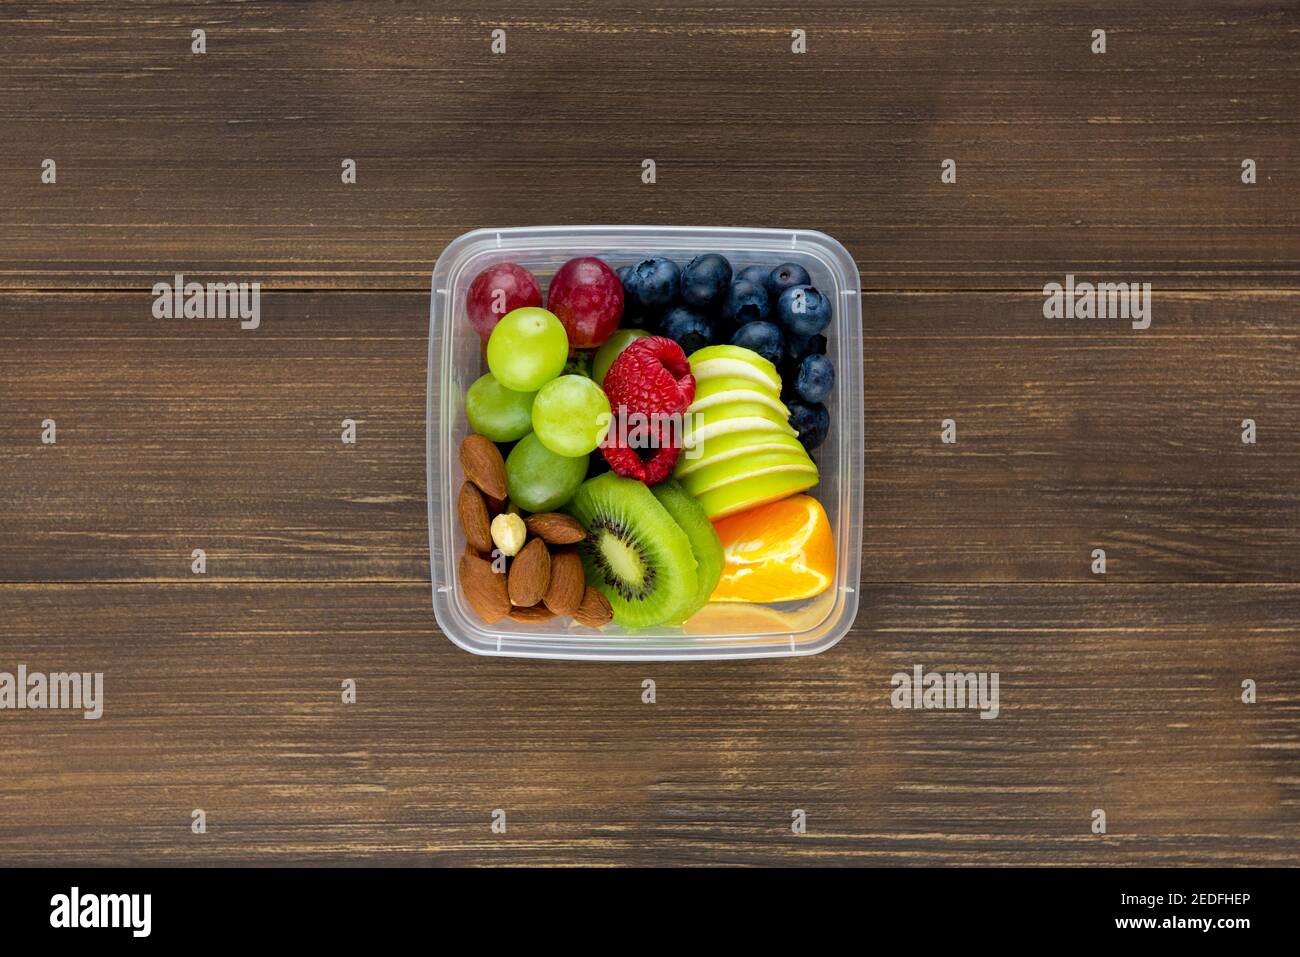 Colorful fresh healthy mixed fruits with almonds in takeaway box on wooden table top view Stock Photo